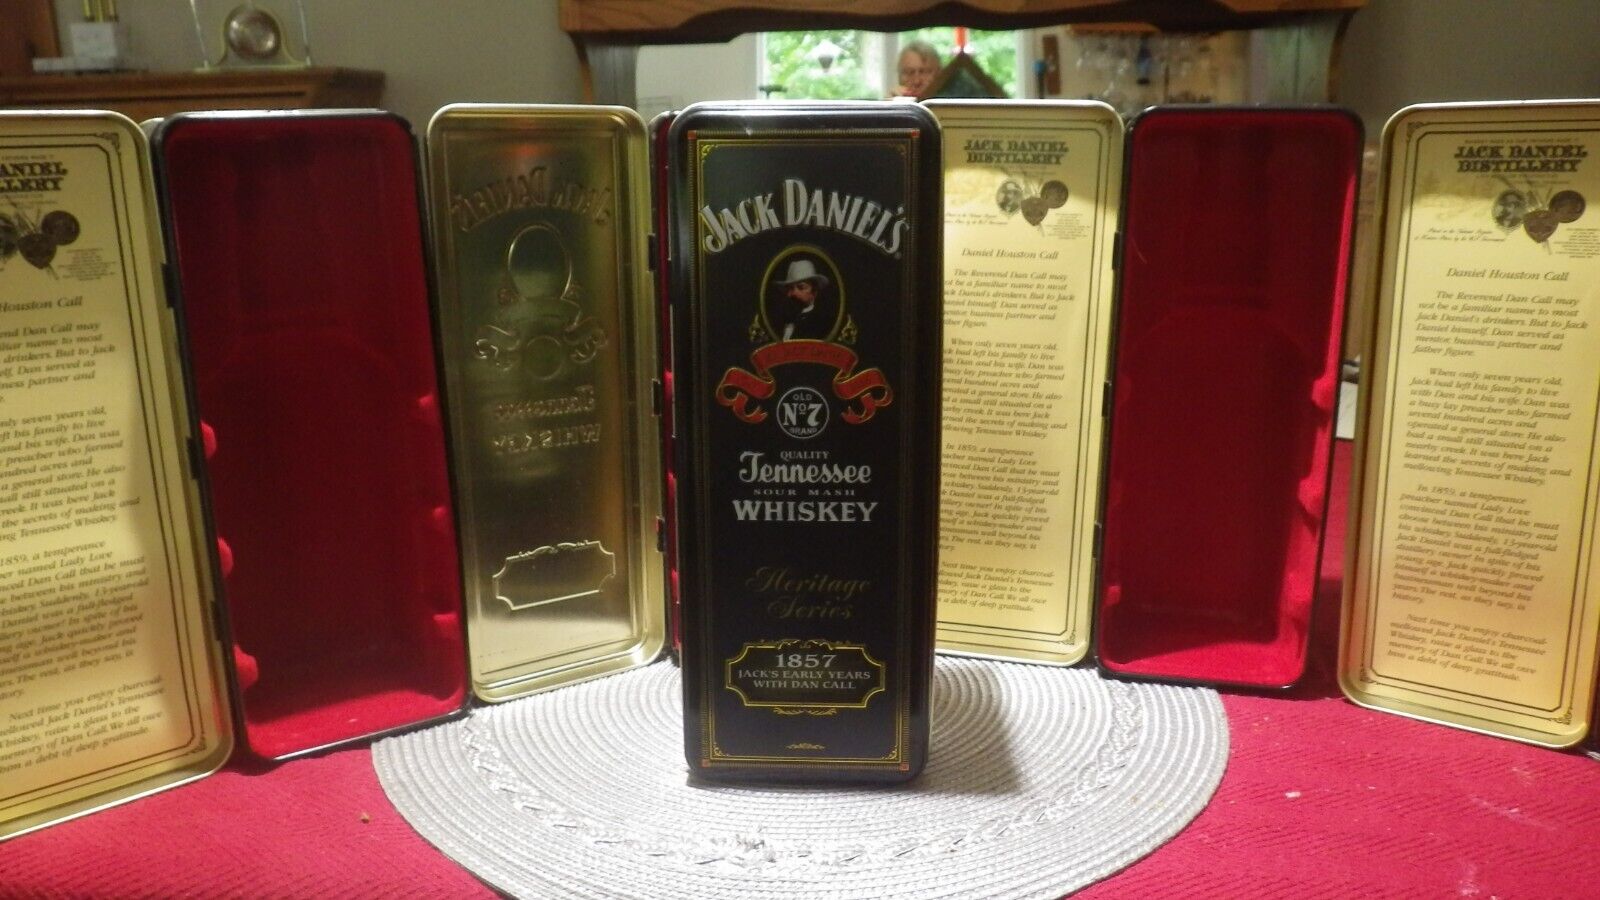 Five Jack Daniels Tennessee Whiskey Old No. 7 Tin Boxes with inserts